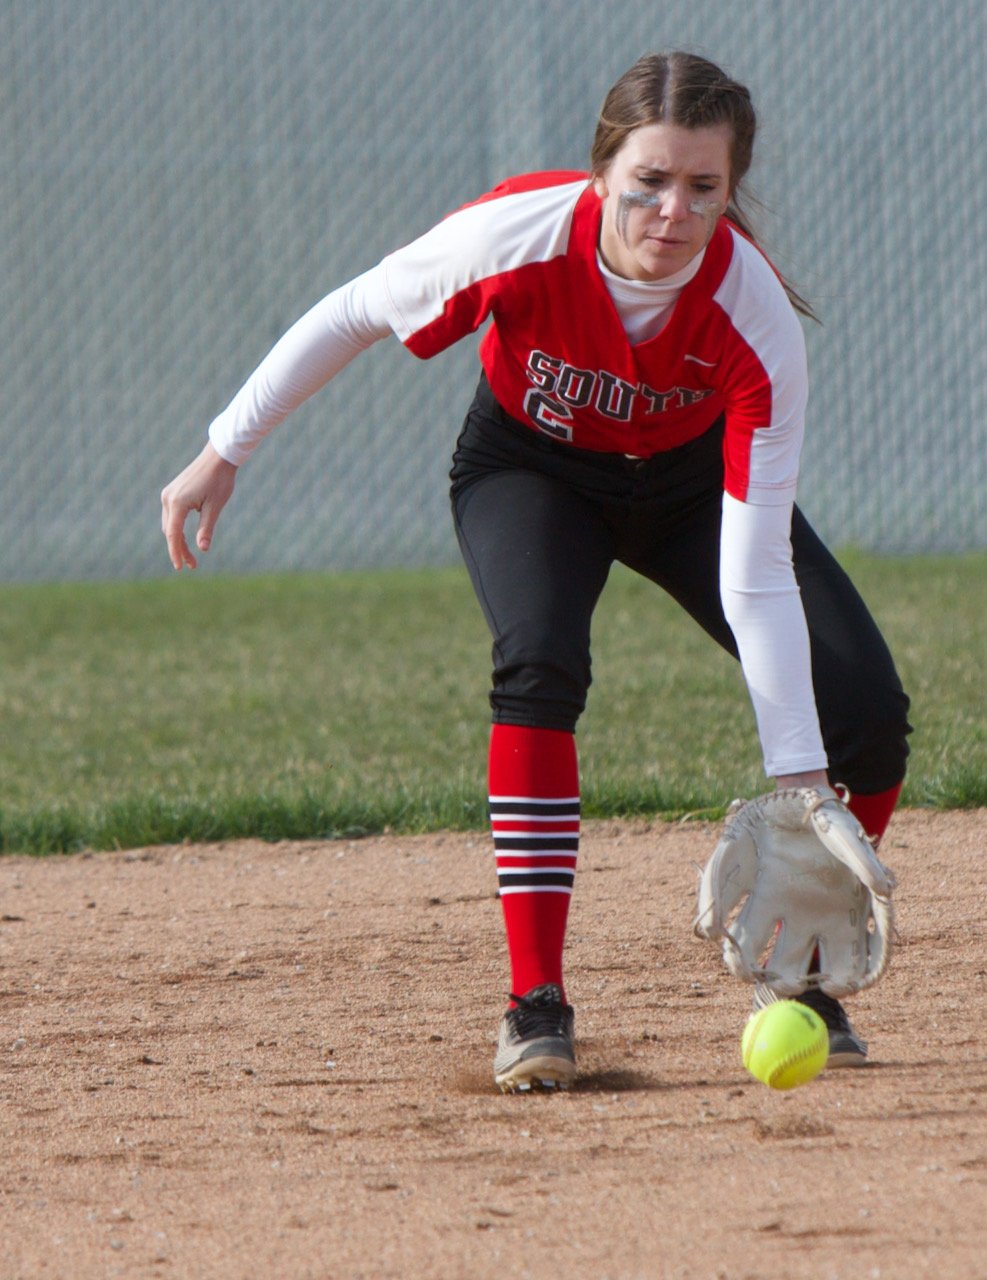 Senior Chelsea Veatch will be one of the anchors of the Southmont softball team both with her bat and in the field at shortstop.